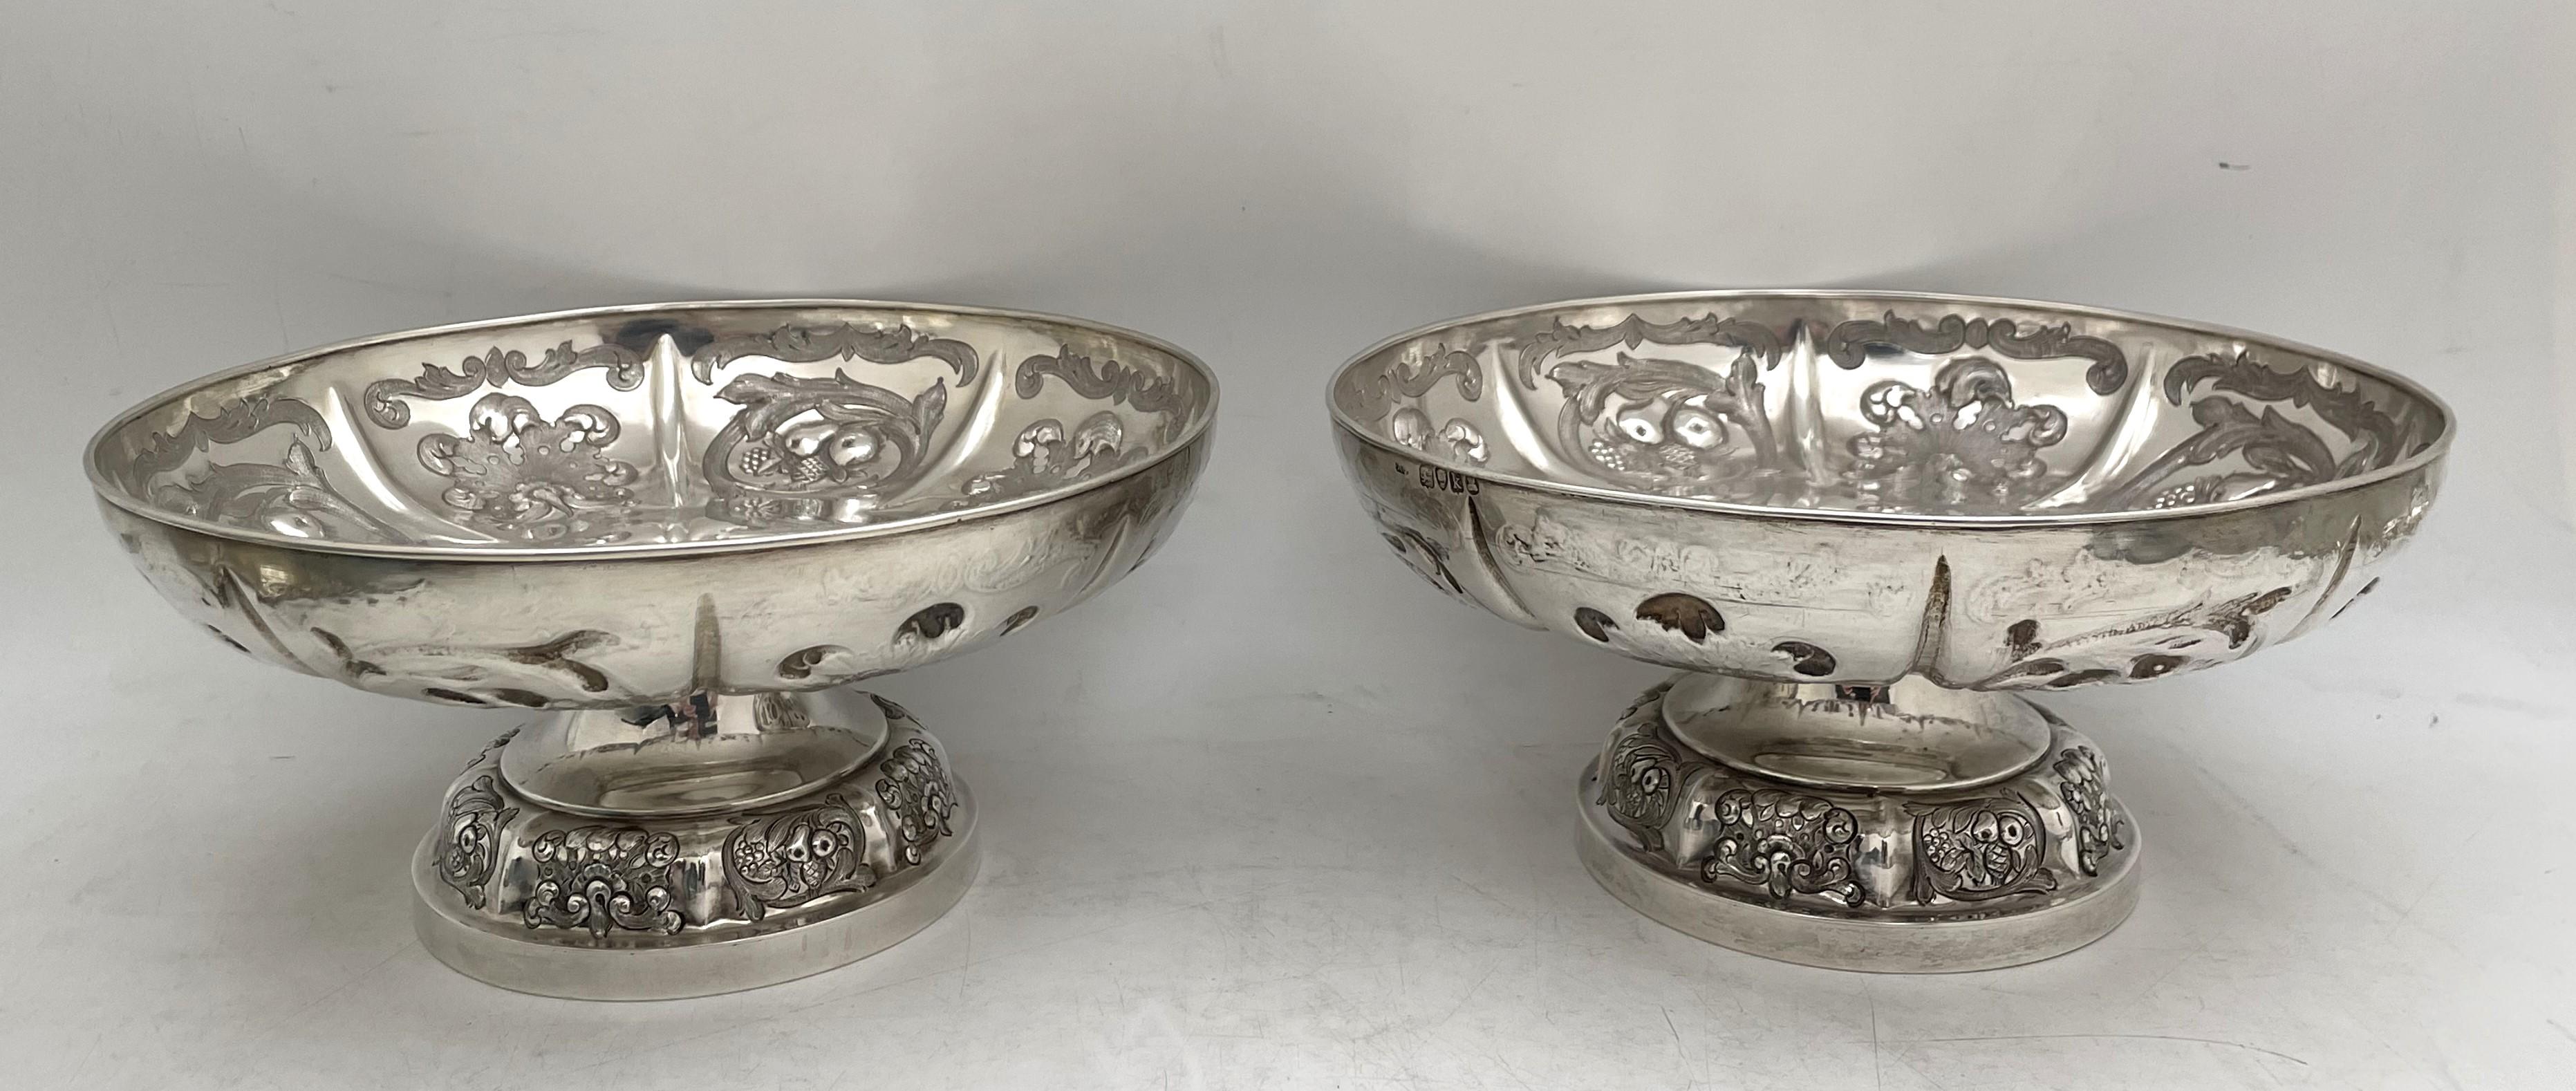 Pair of Garrard English sterling silver footed bowls or dishes, made in 1825 during the Georgian era, beautifully adorned with stylized geometric and natural motifs in relief. They measure 8'' in diameter by 3 7/8'' in height, weigh 39 troy ounces,